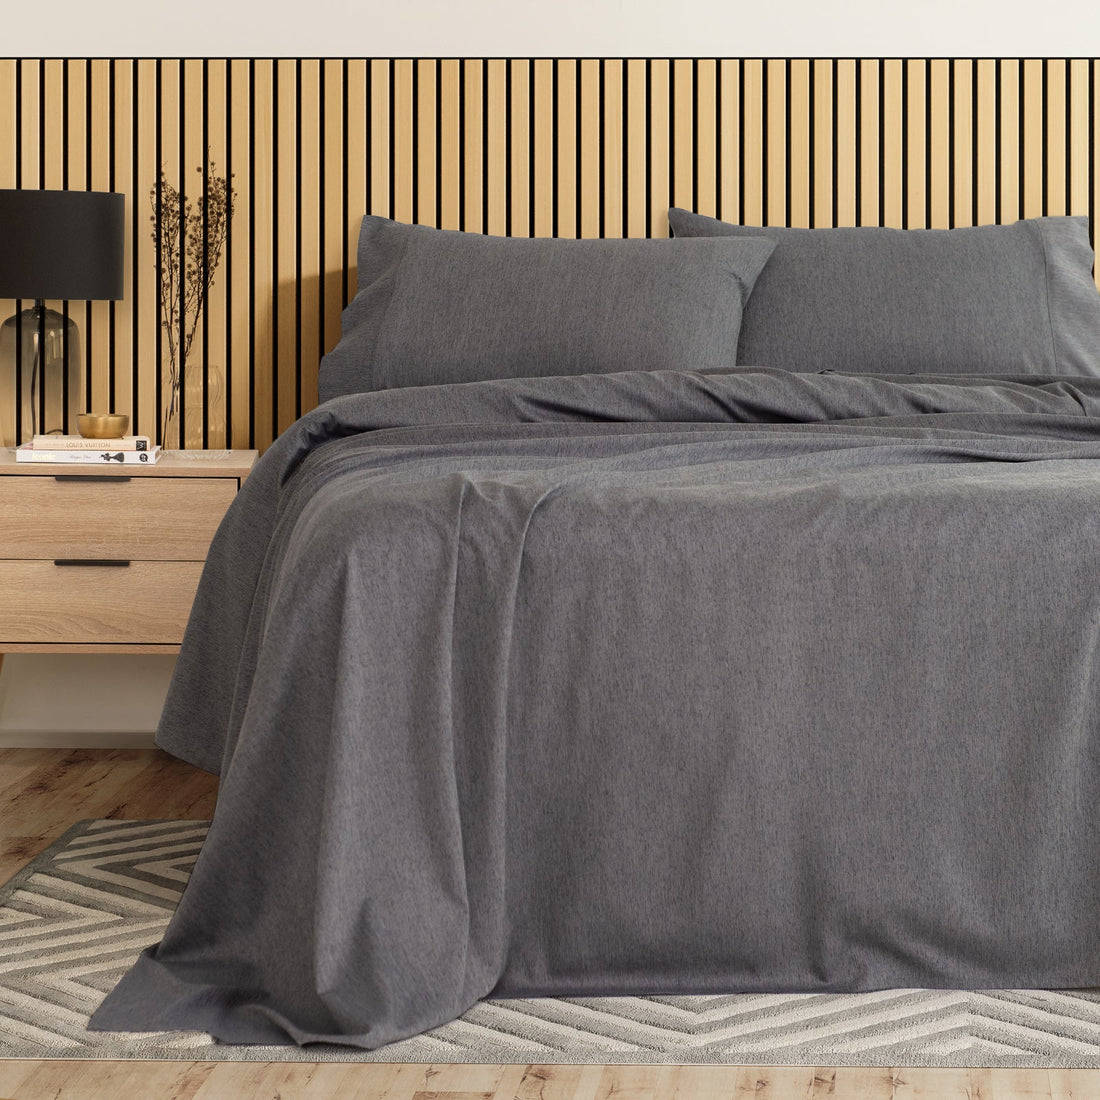 Royal Comfort 3000 Thread Count Bamboo Cooling Sheet Set - Queen - Charcoal